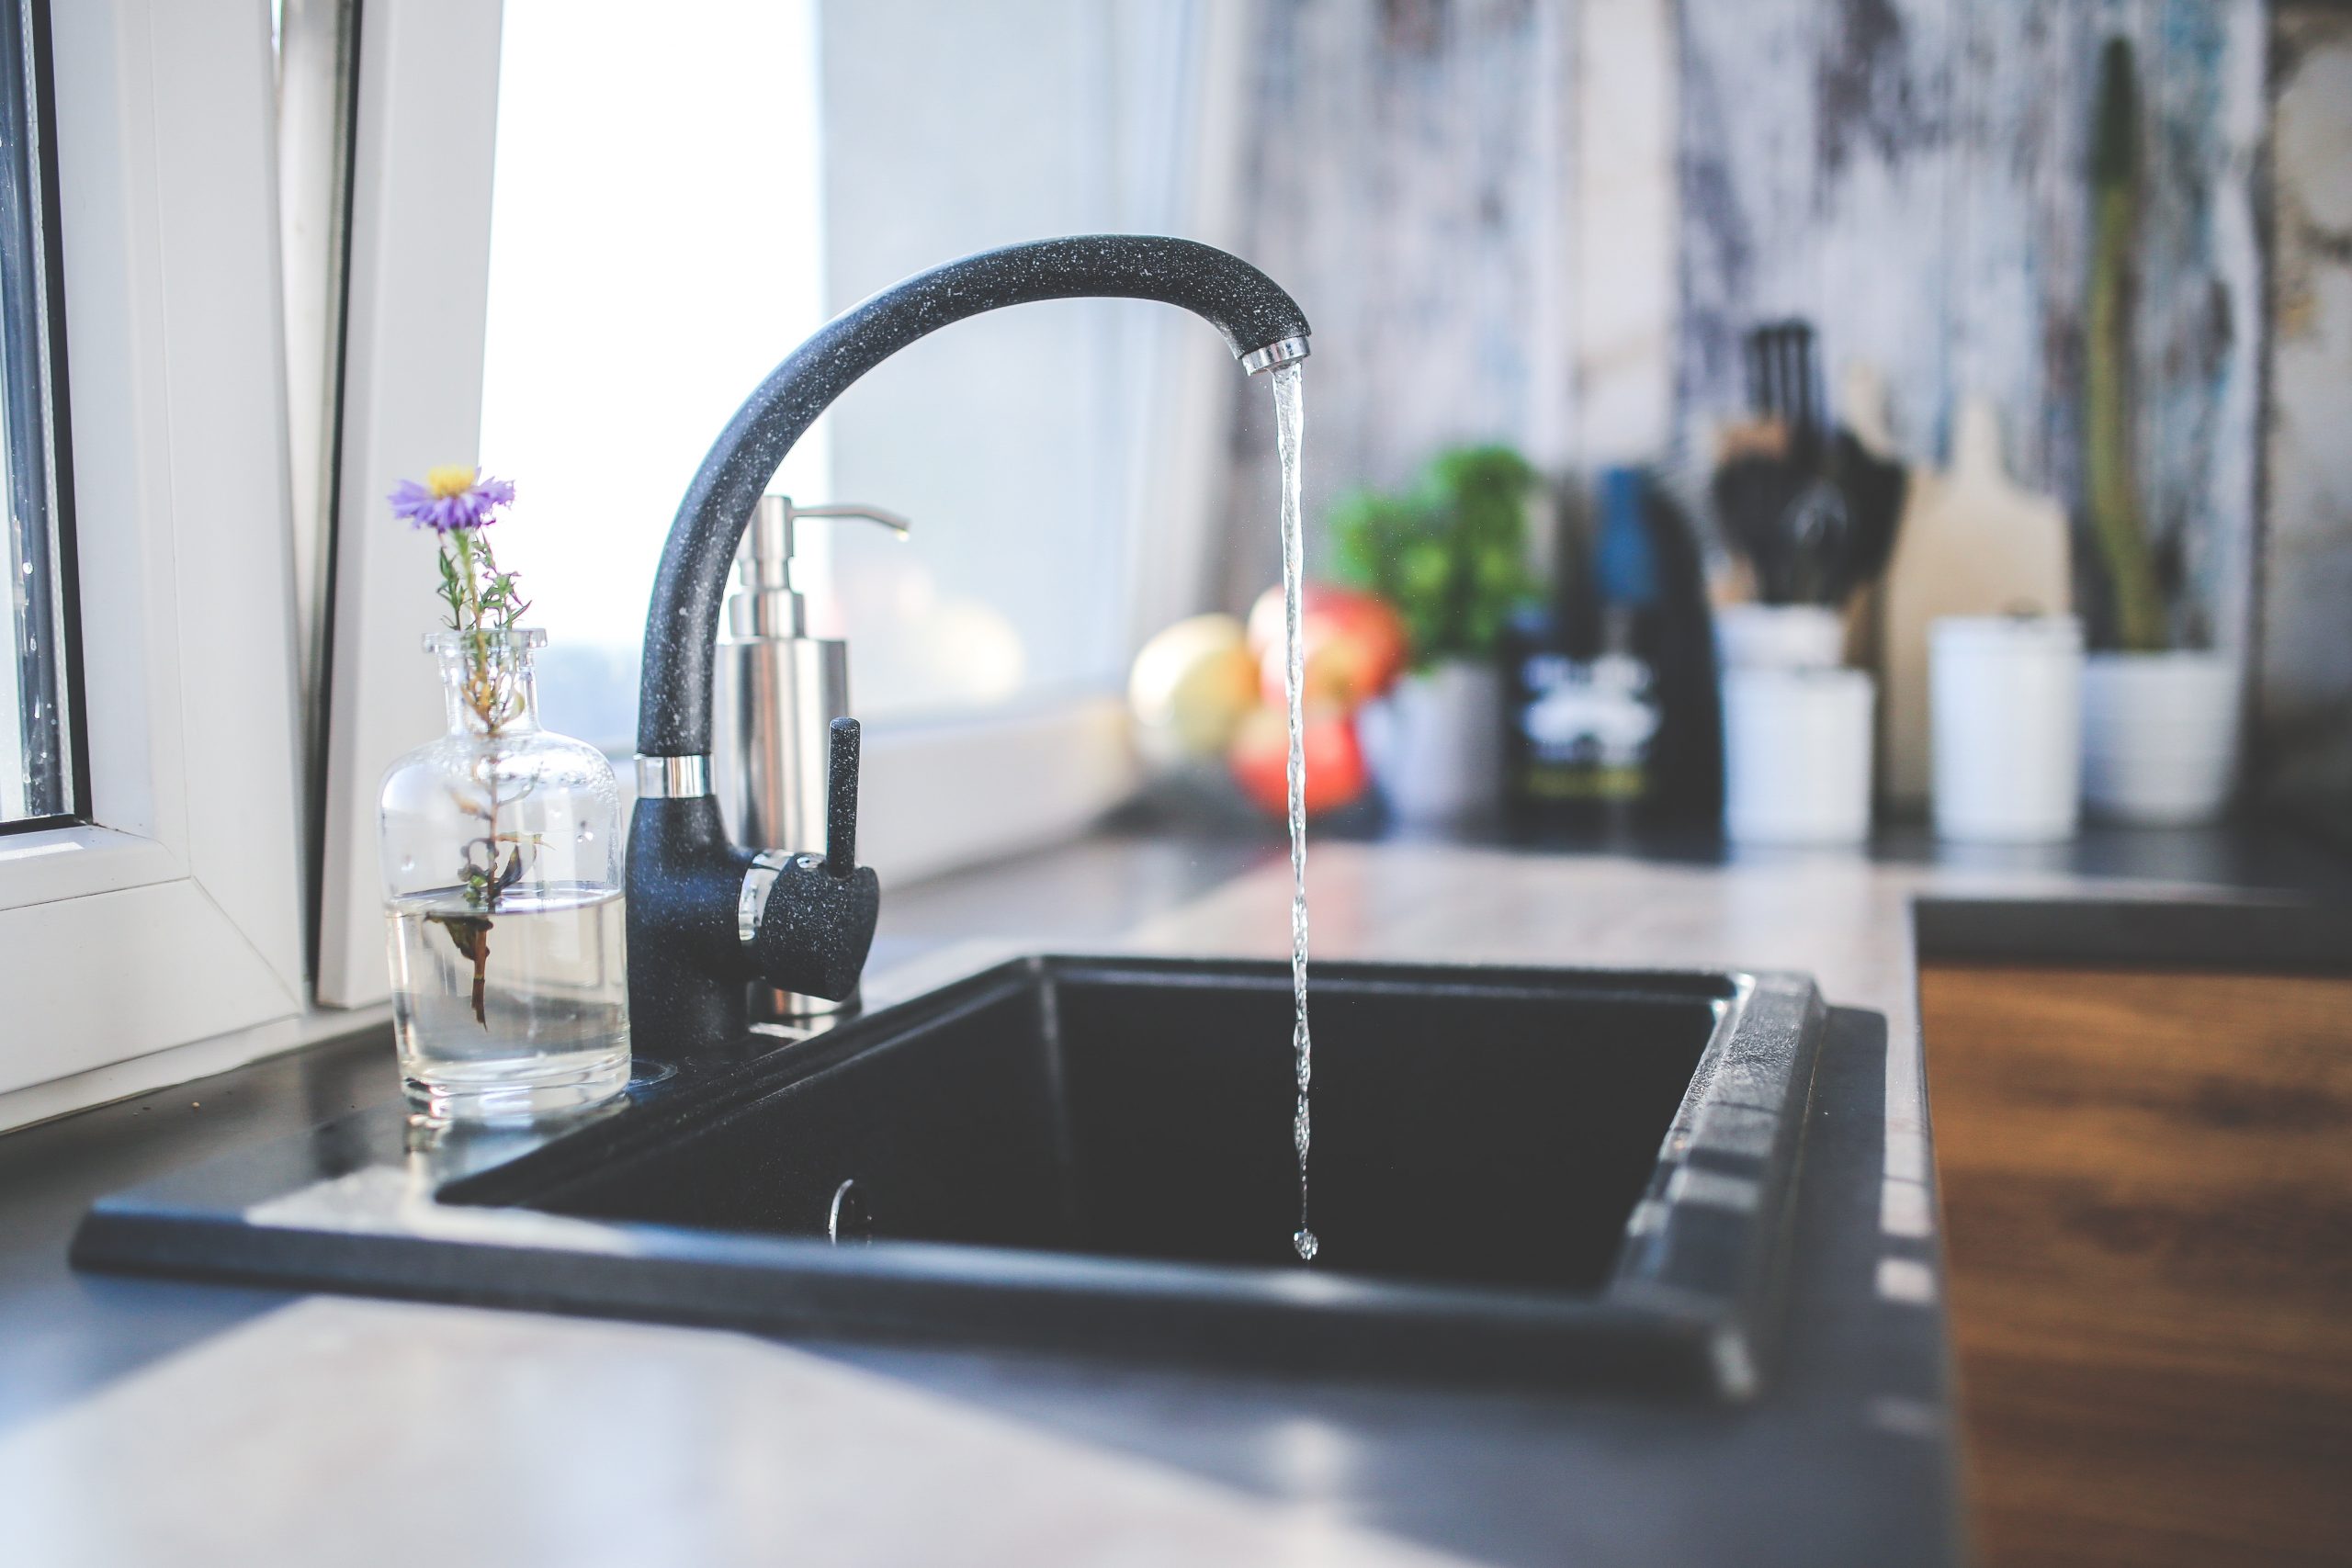 Products to Keep Your Kitchen Sink Clean